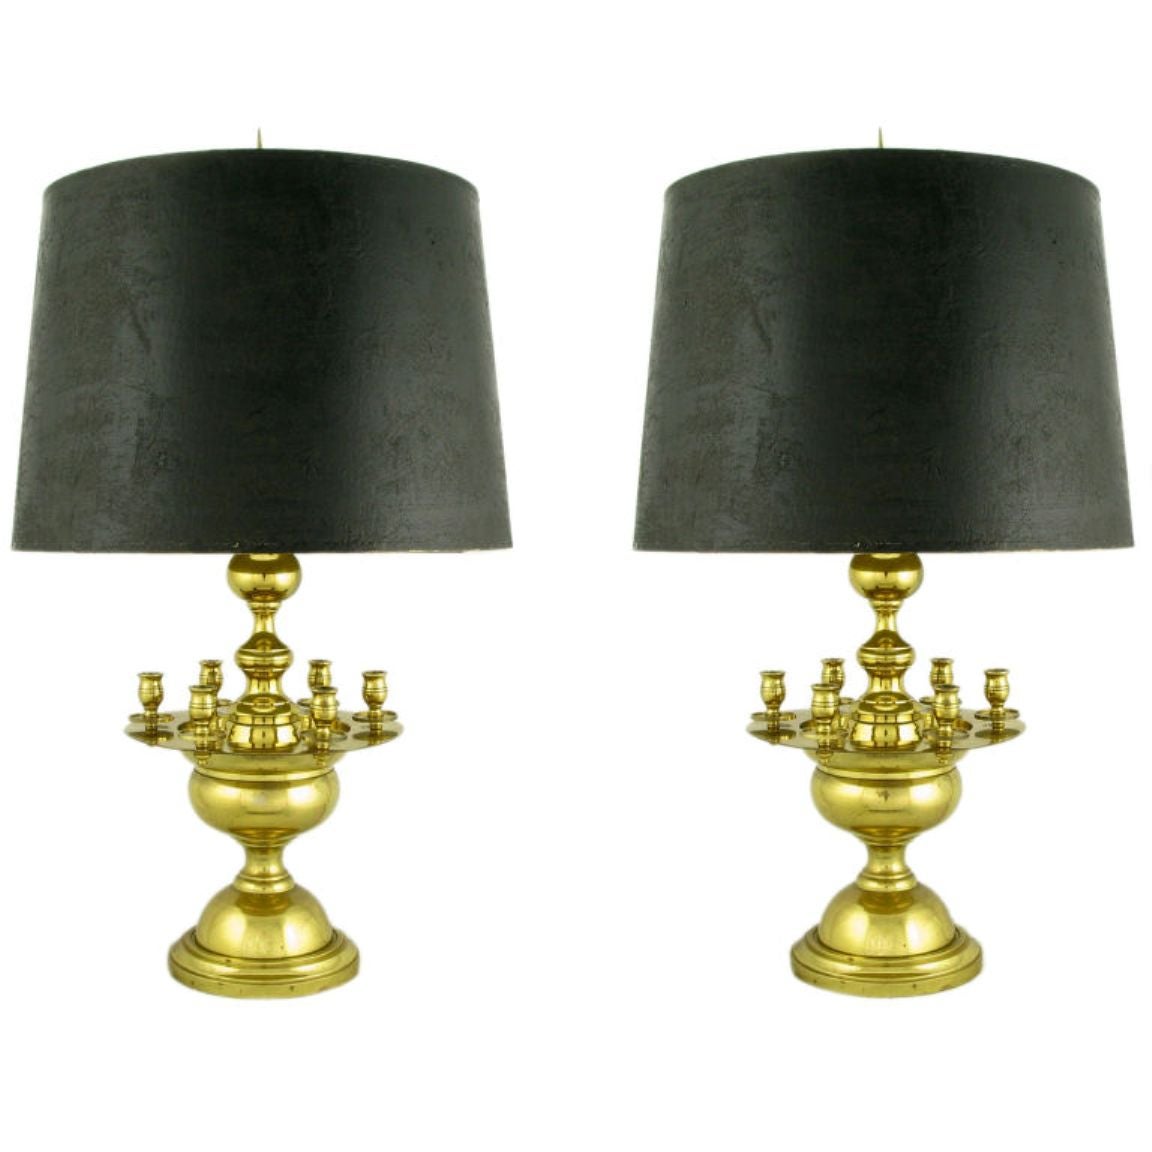 Pair of Heavy Brass Regency Table Lamps with Candelabra